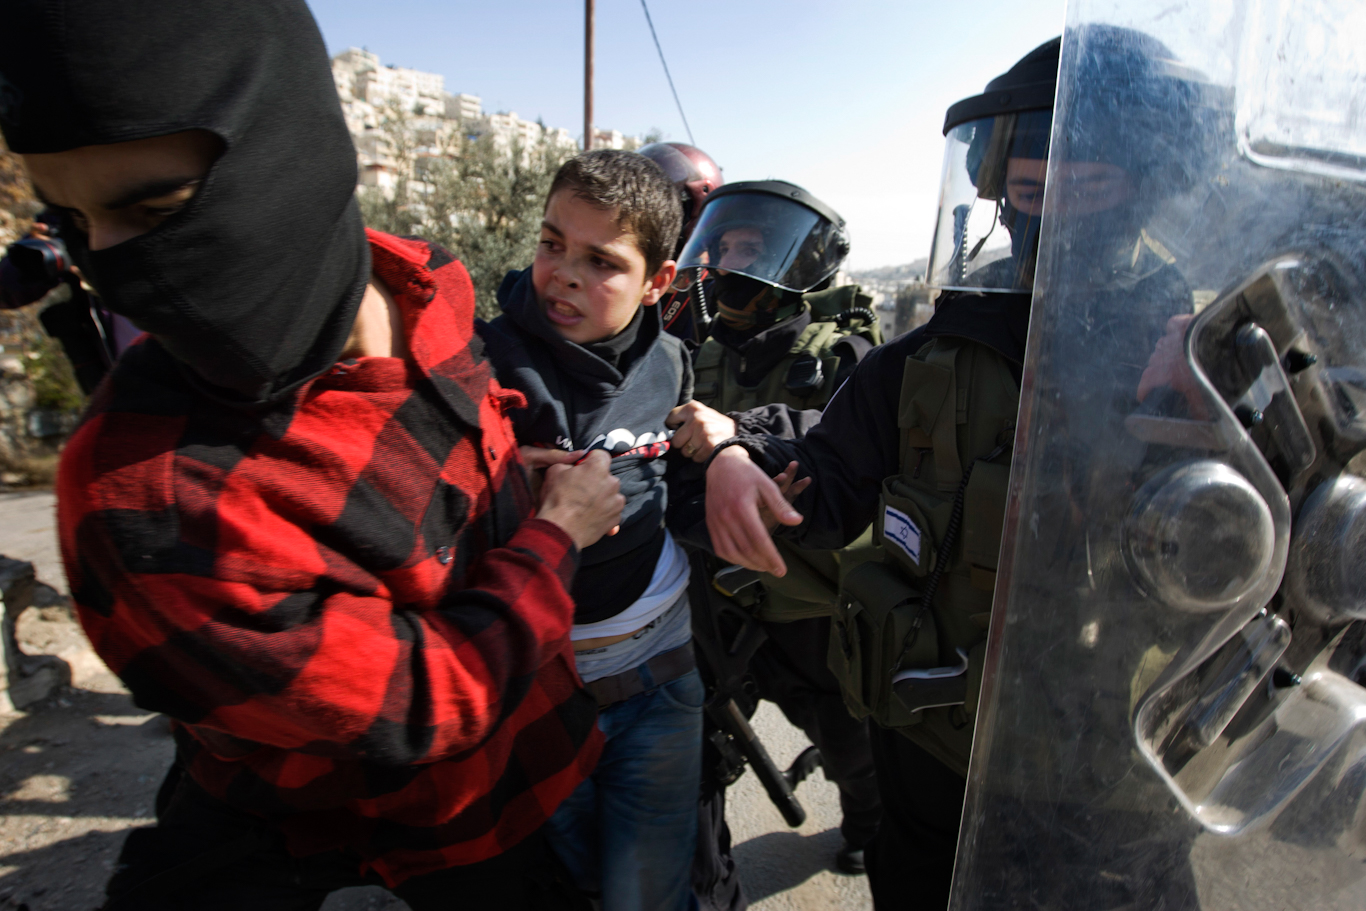 Israeli police disguised as civilians arrest a Palestinian boy during protests over Jewish-only settlements in Silwan, Jan. 28, 2011. Sebastian Scheiner | AP